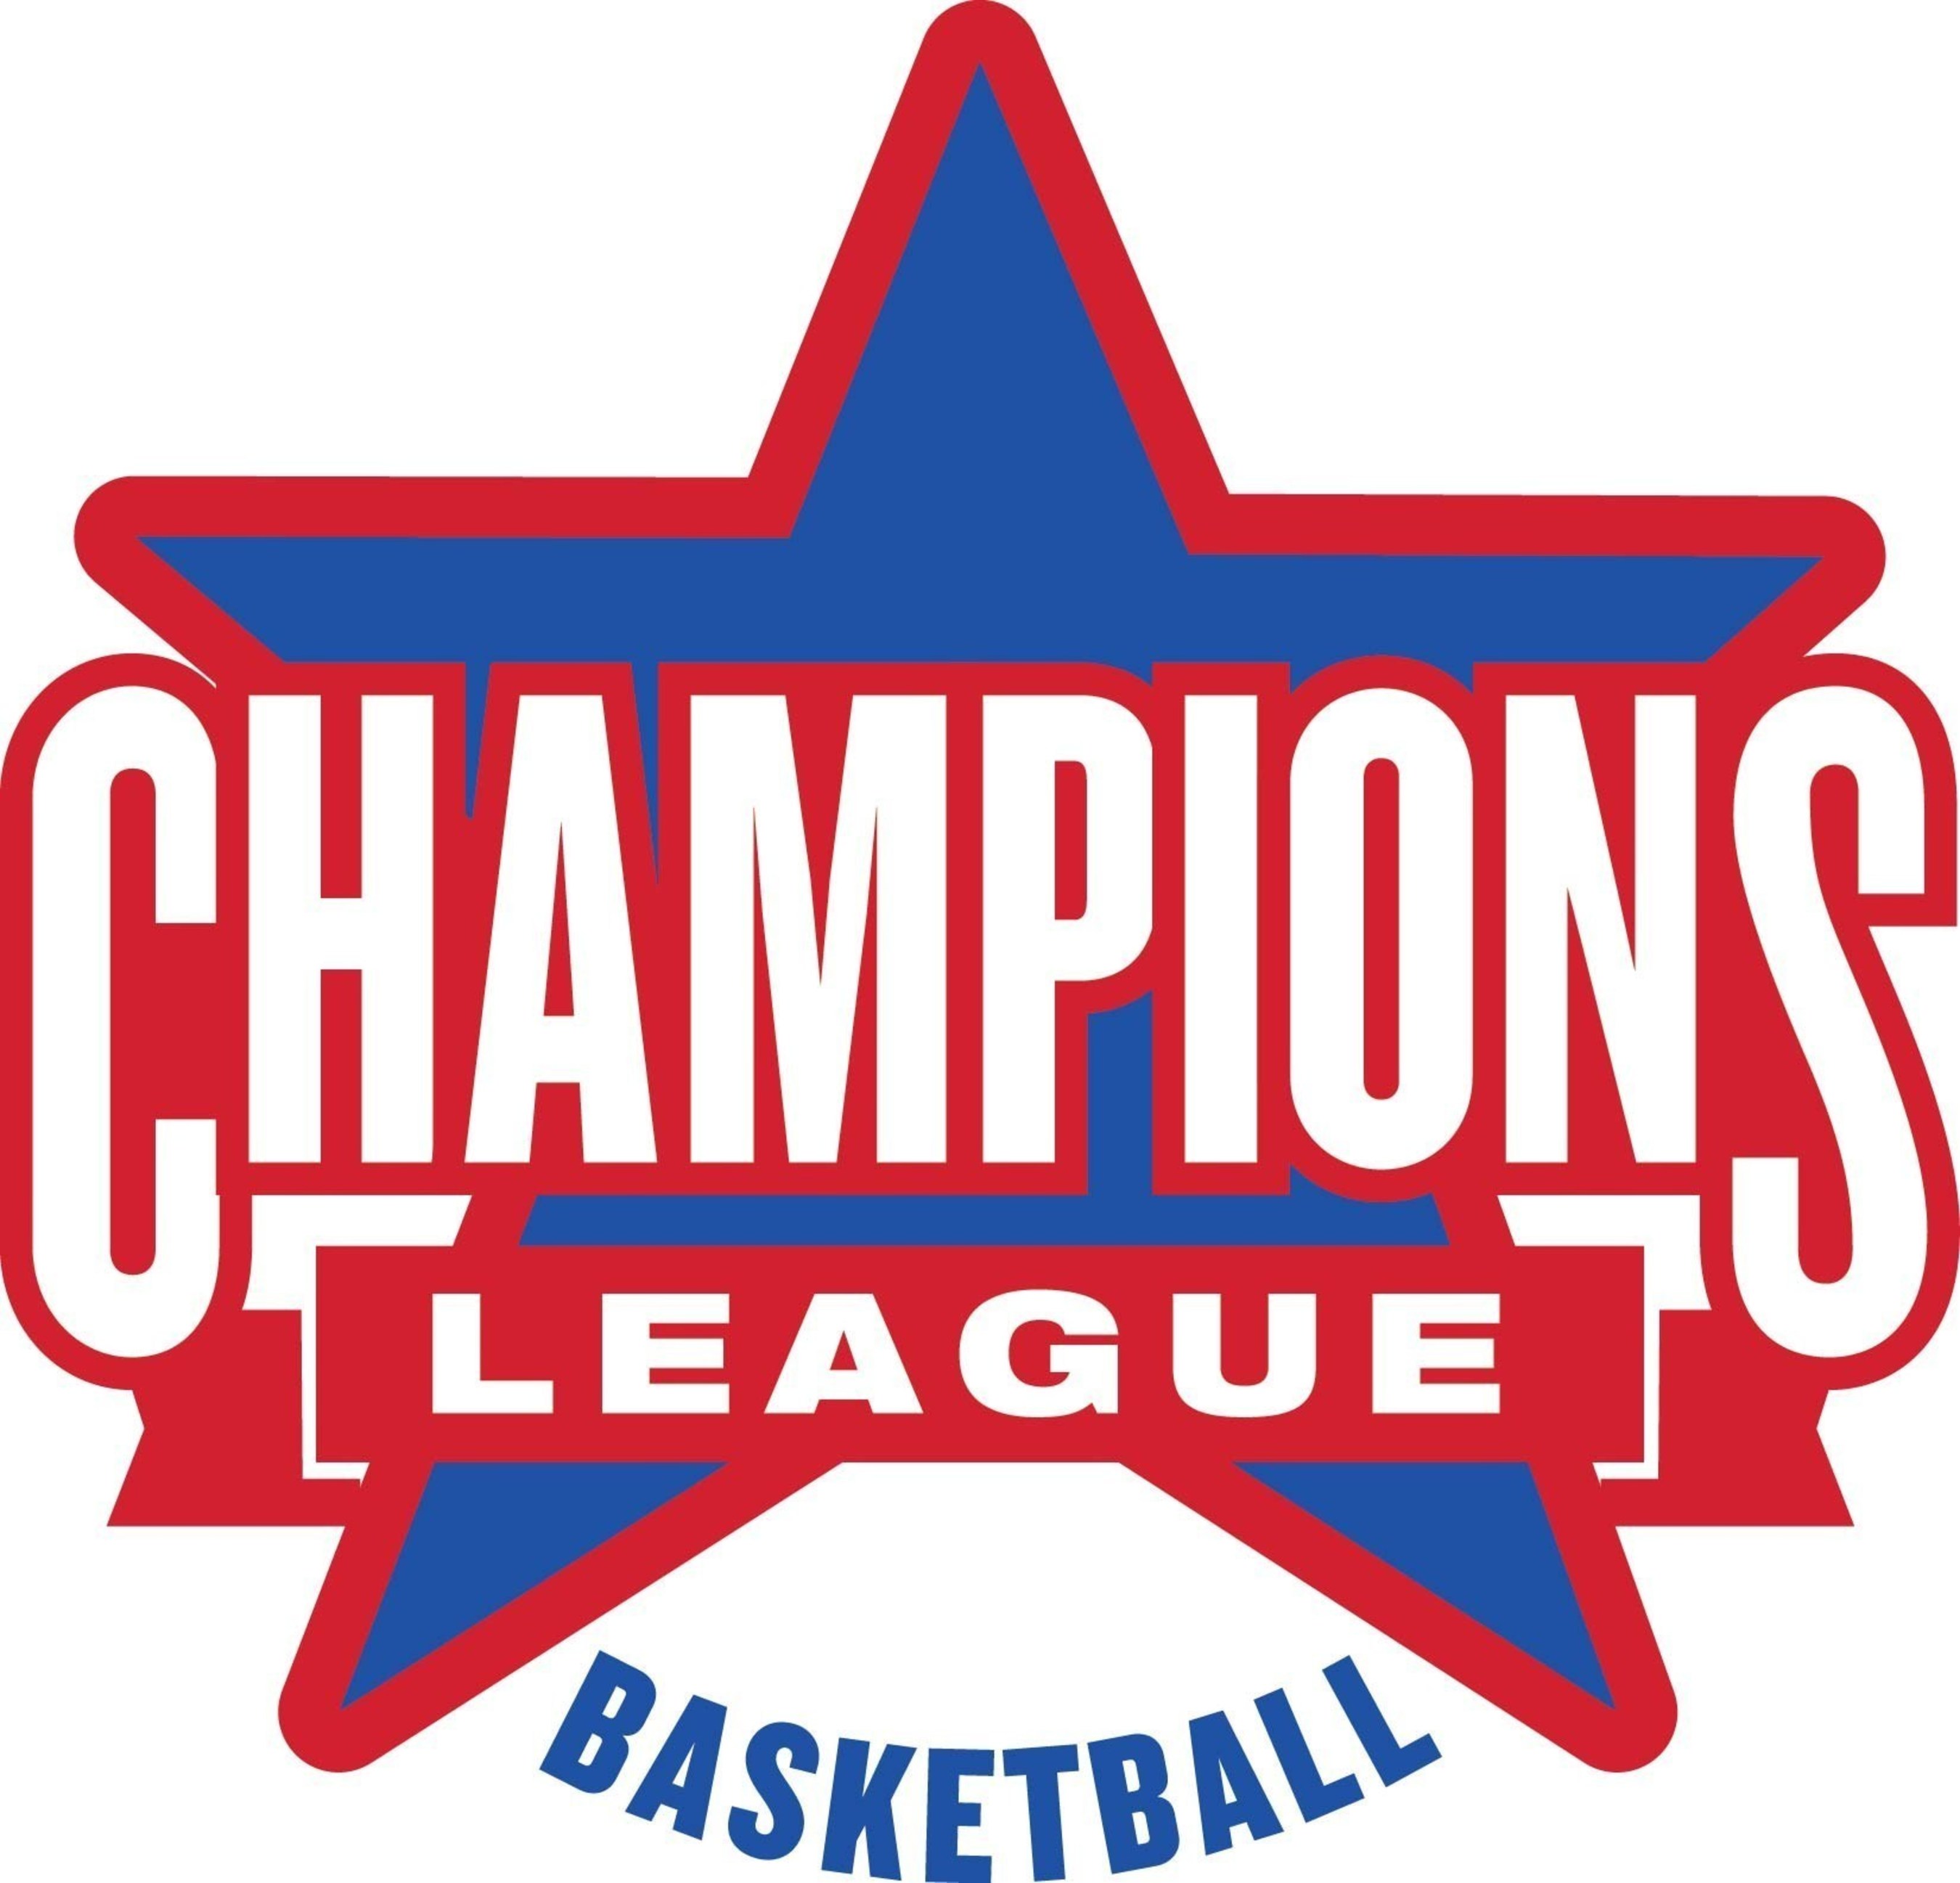 Champions Basketball League Announces New York Team Name And.